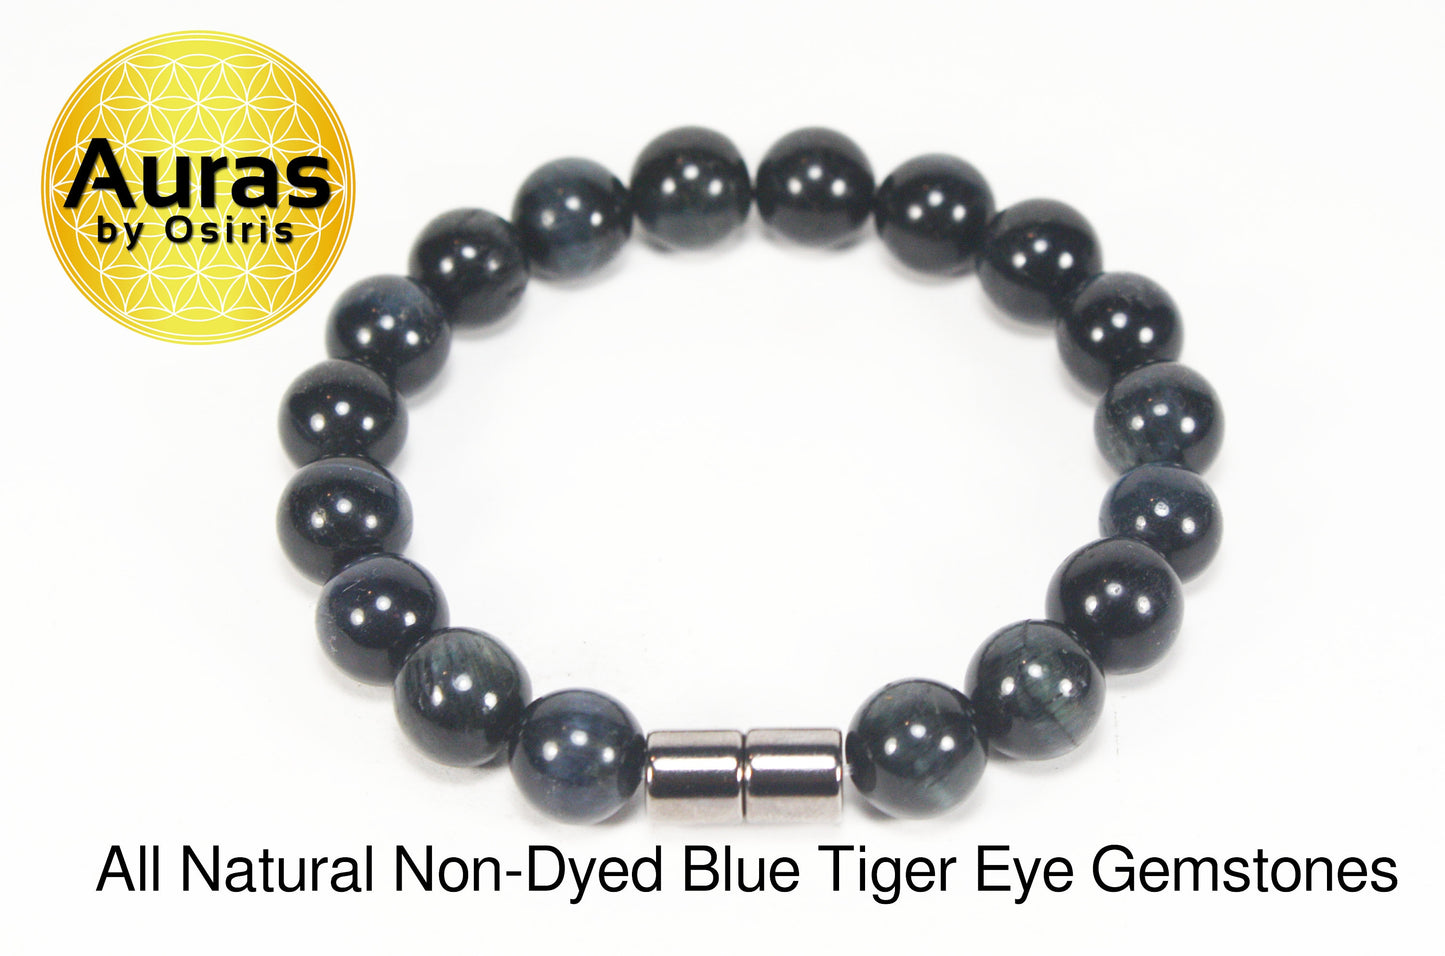 10mm Blue Tiger Eye Bracelet Non-Dyed Natural Blue Crystals 100lb test With Magnetic Clasp